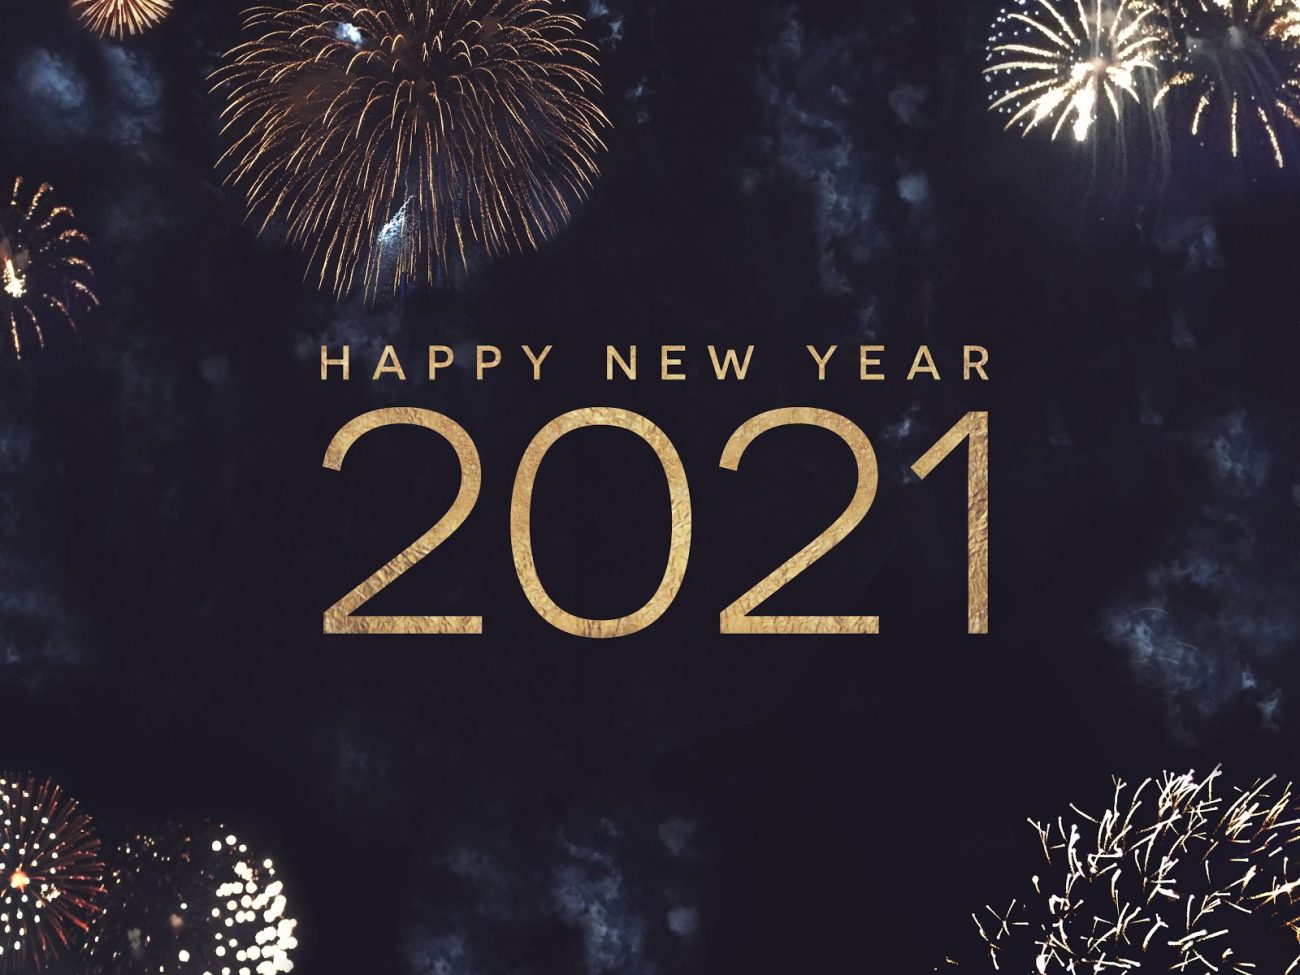 The Top 5 New Year Financial Resolutions for Gen X in 2021